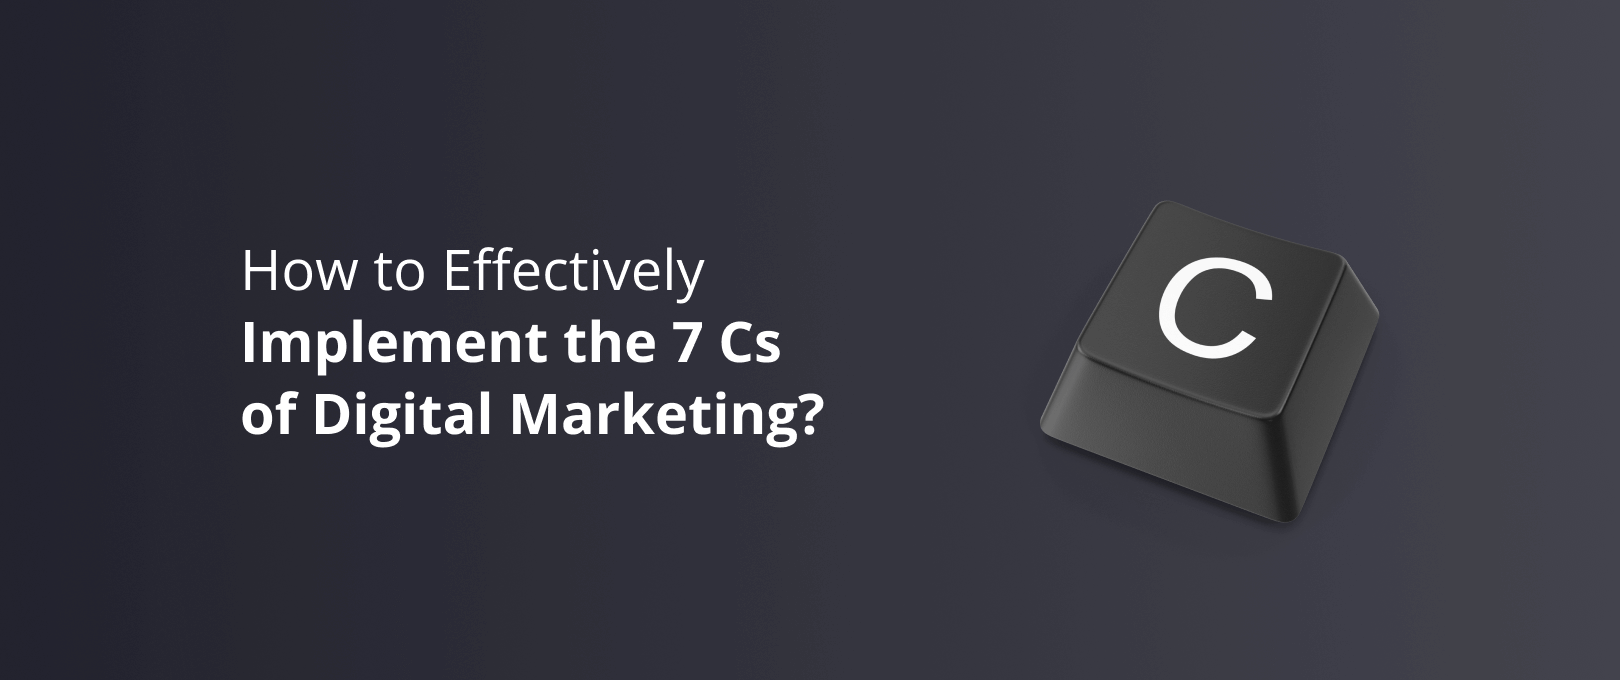 A Guide to Implementing the 7 C’s of Digital Marketing for a Startup